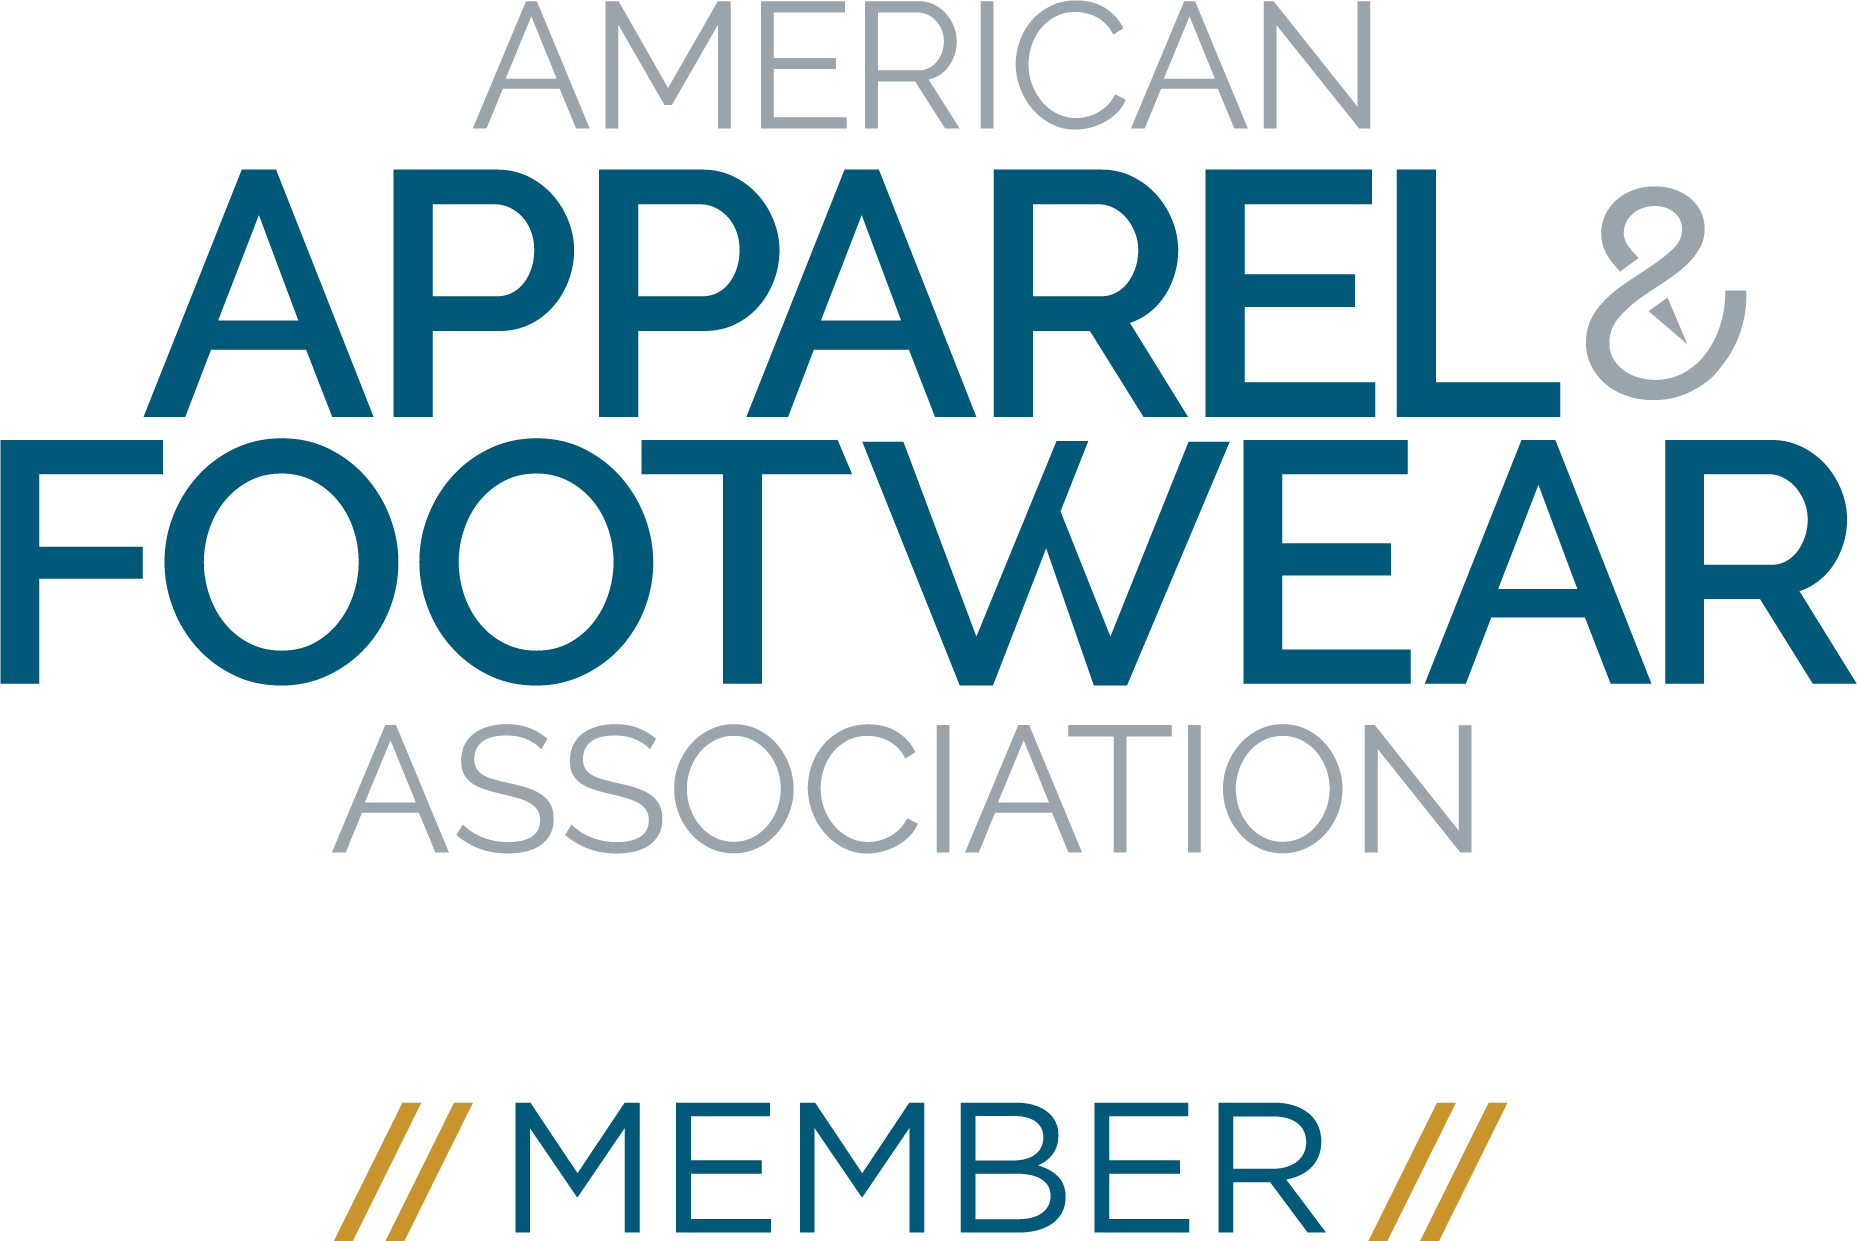 UWL is an affiliate member of the American Apparel and Footwear Association (AAFA)